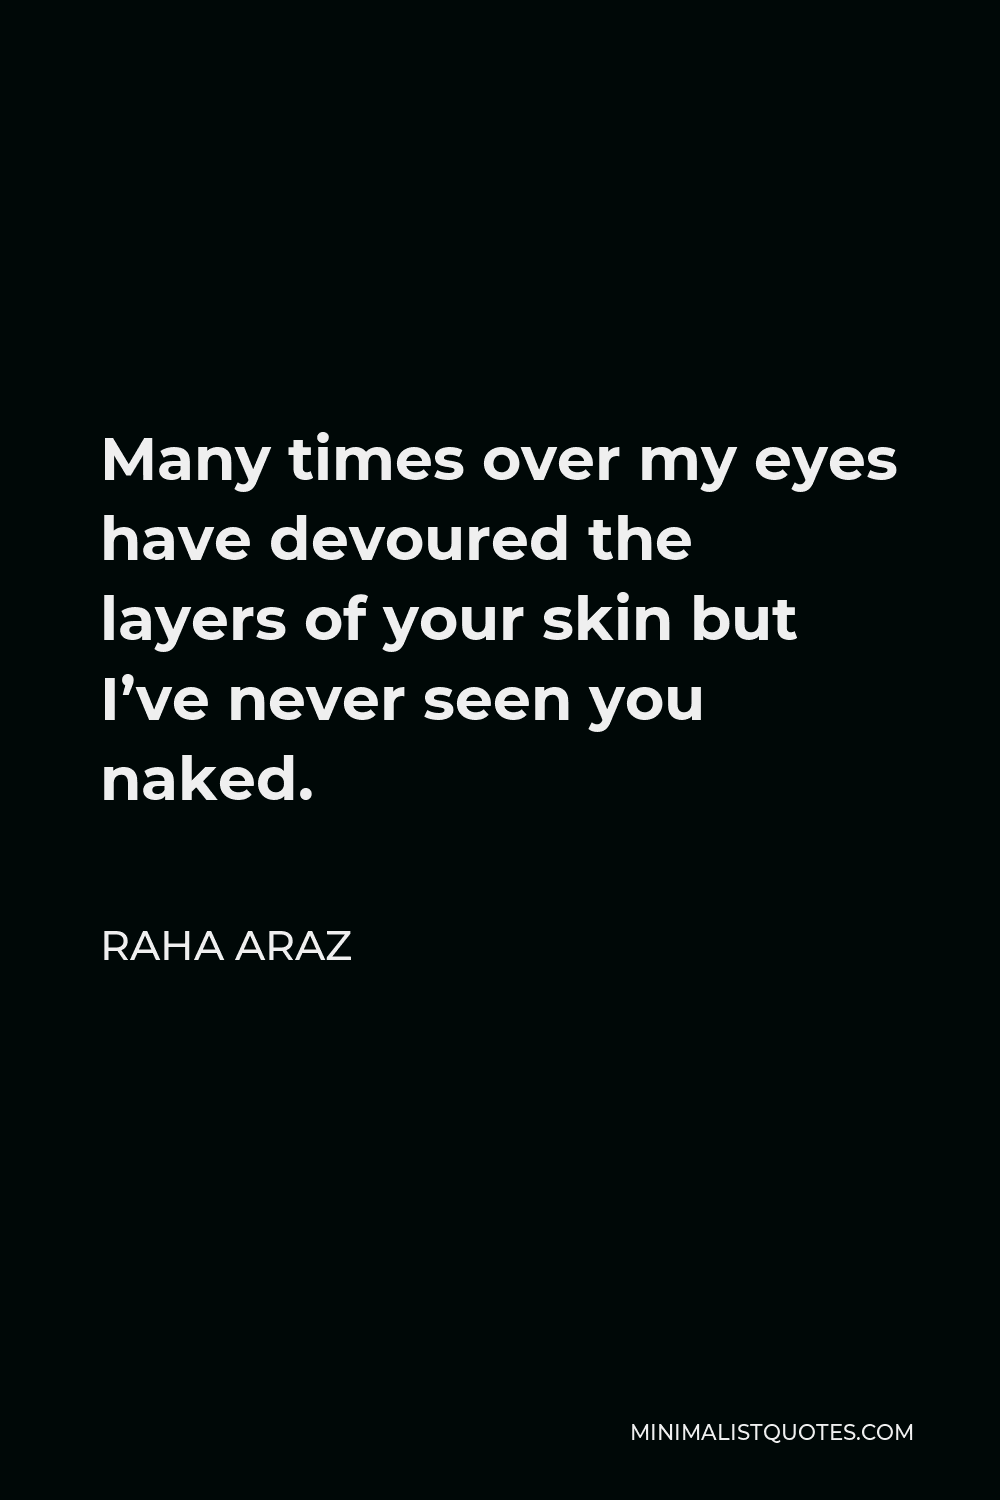 Raha Araz Quote - Many times over my eyes have devoured the layers of your skin but I’ve never seen you naked.